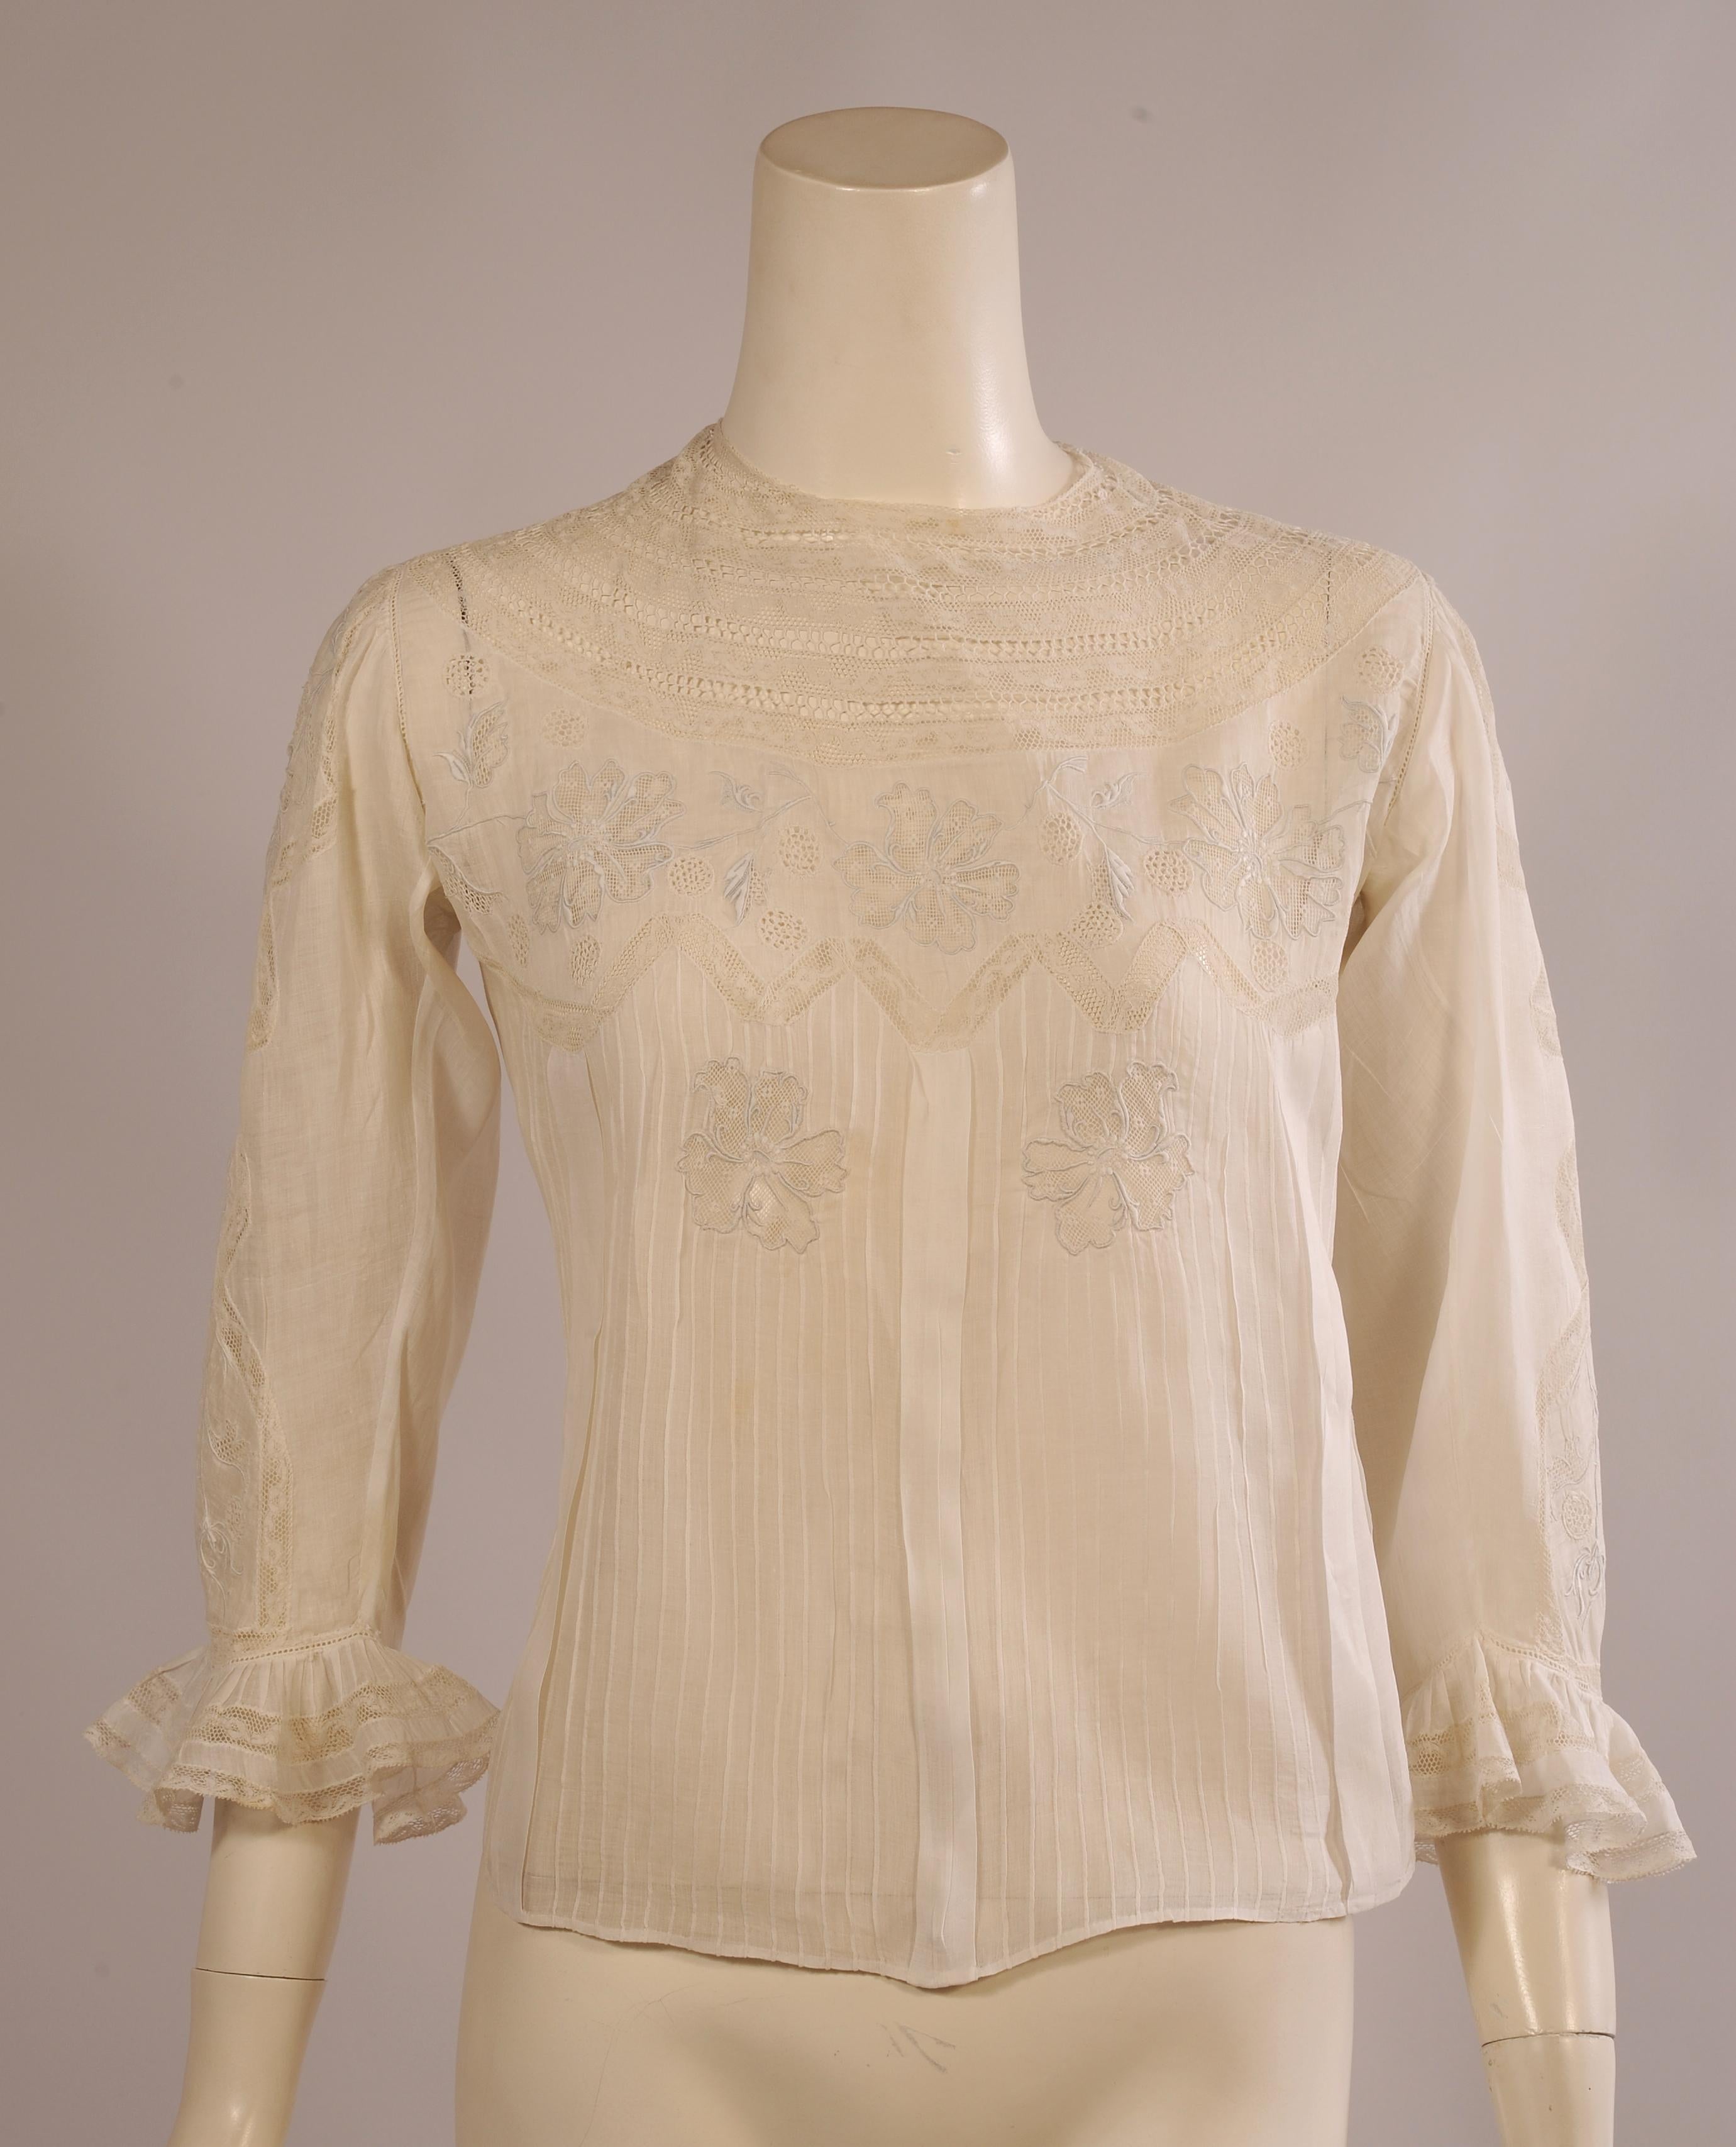 Hand made in Switzerland and retailed on the via Condotti in Rome this handkerchief linen blouse has the most beautiful embroidery and drawn work. The blouse has a wide lace and drawn work yoke and a beautiful panel of hand embroidery above another